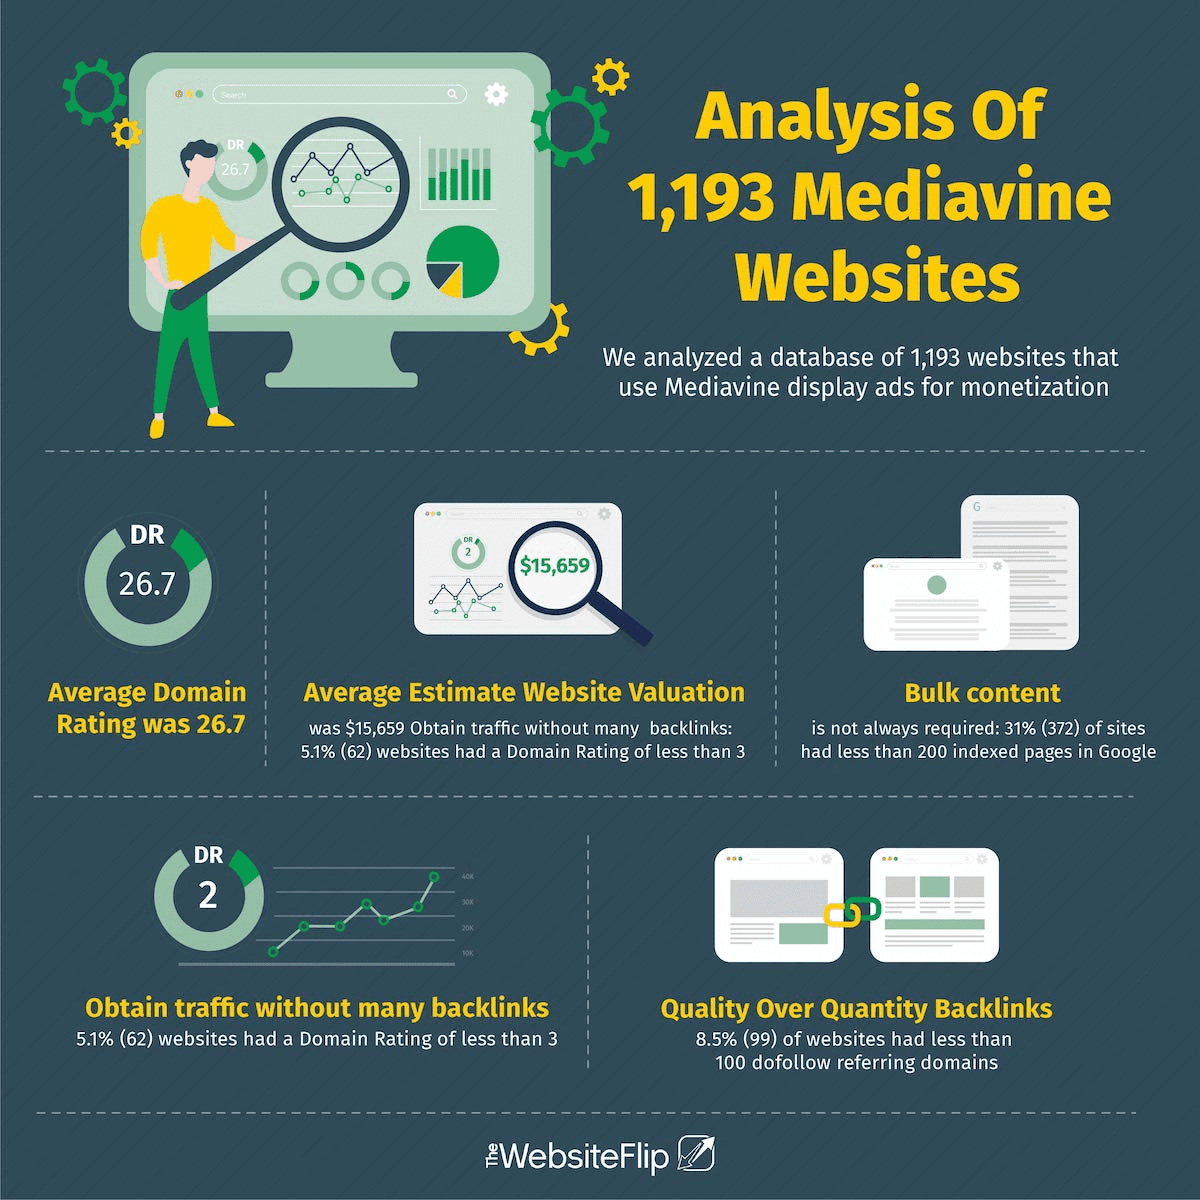 Summary of key findings from the data-driven mediavine analysis